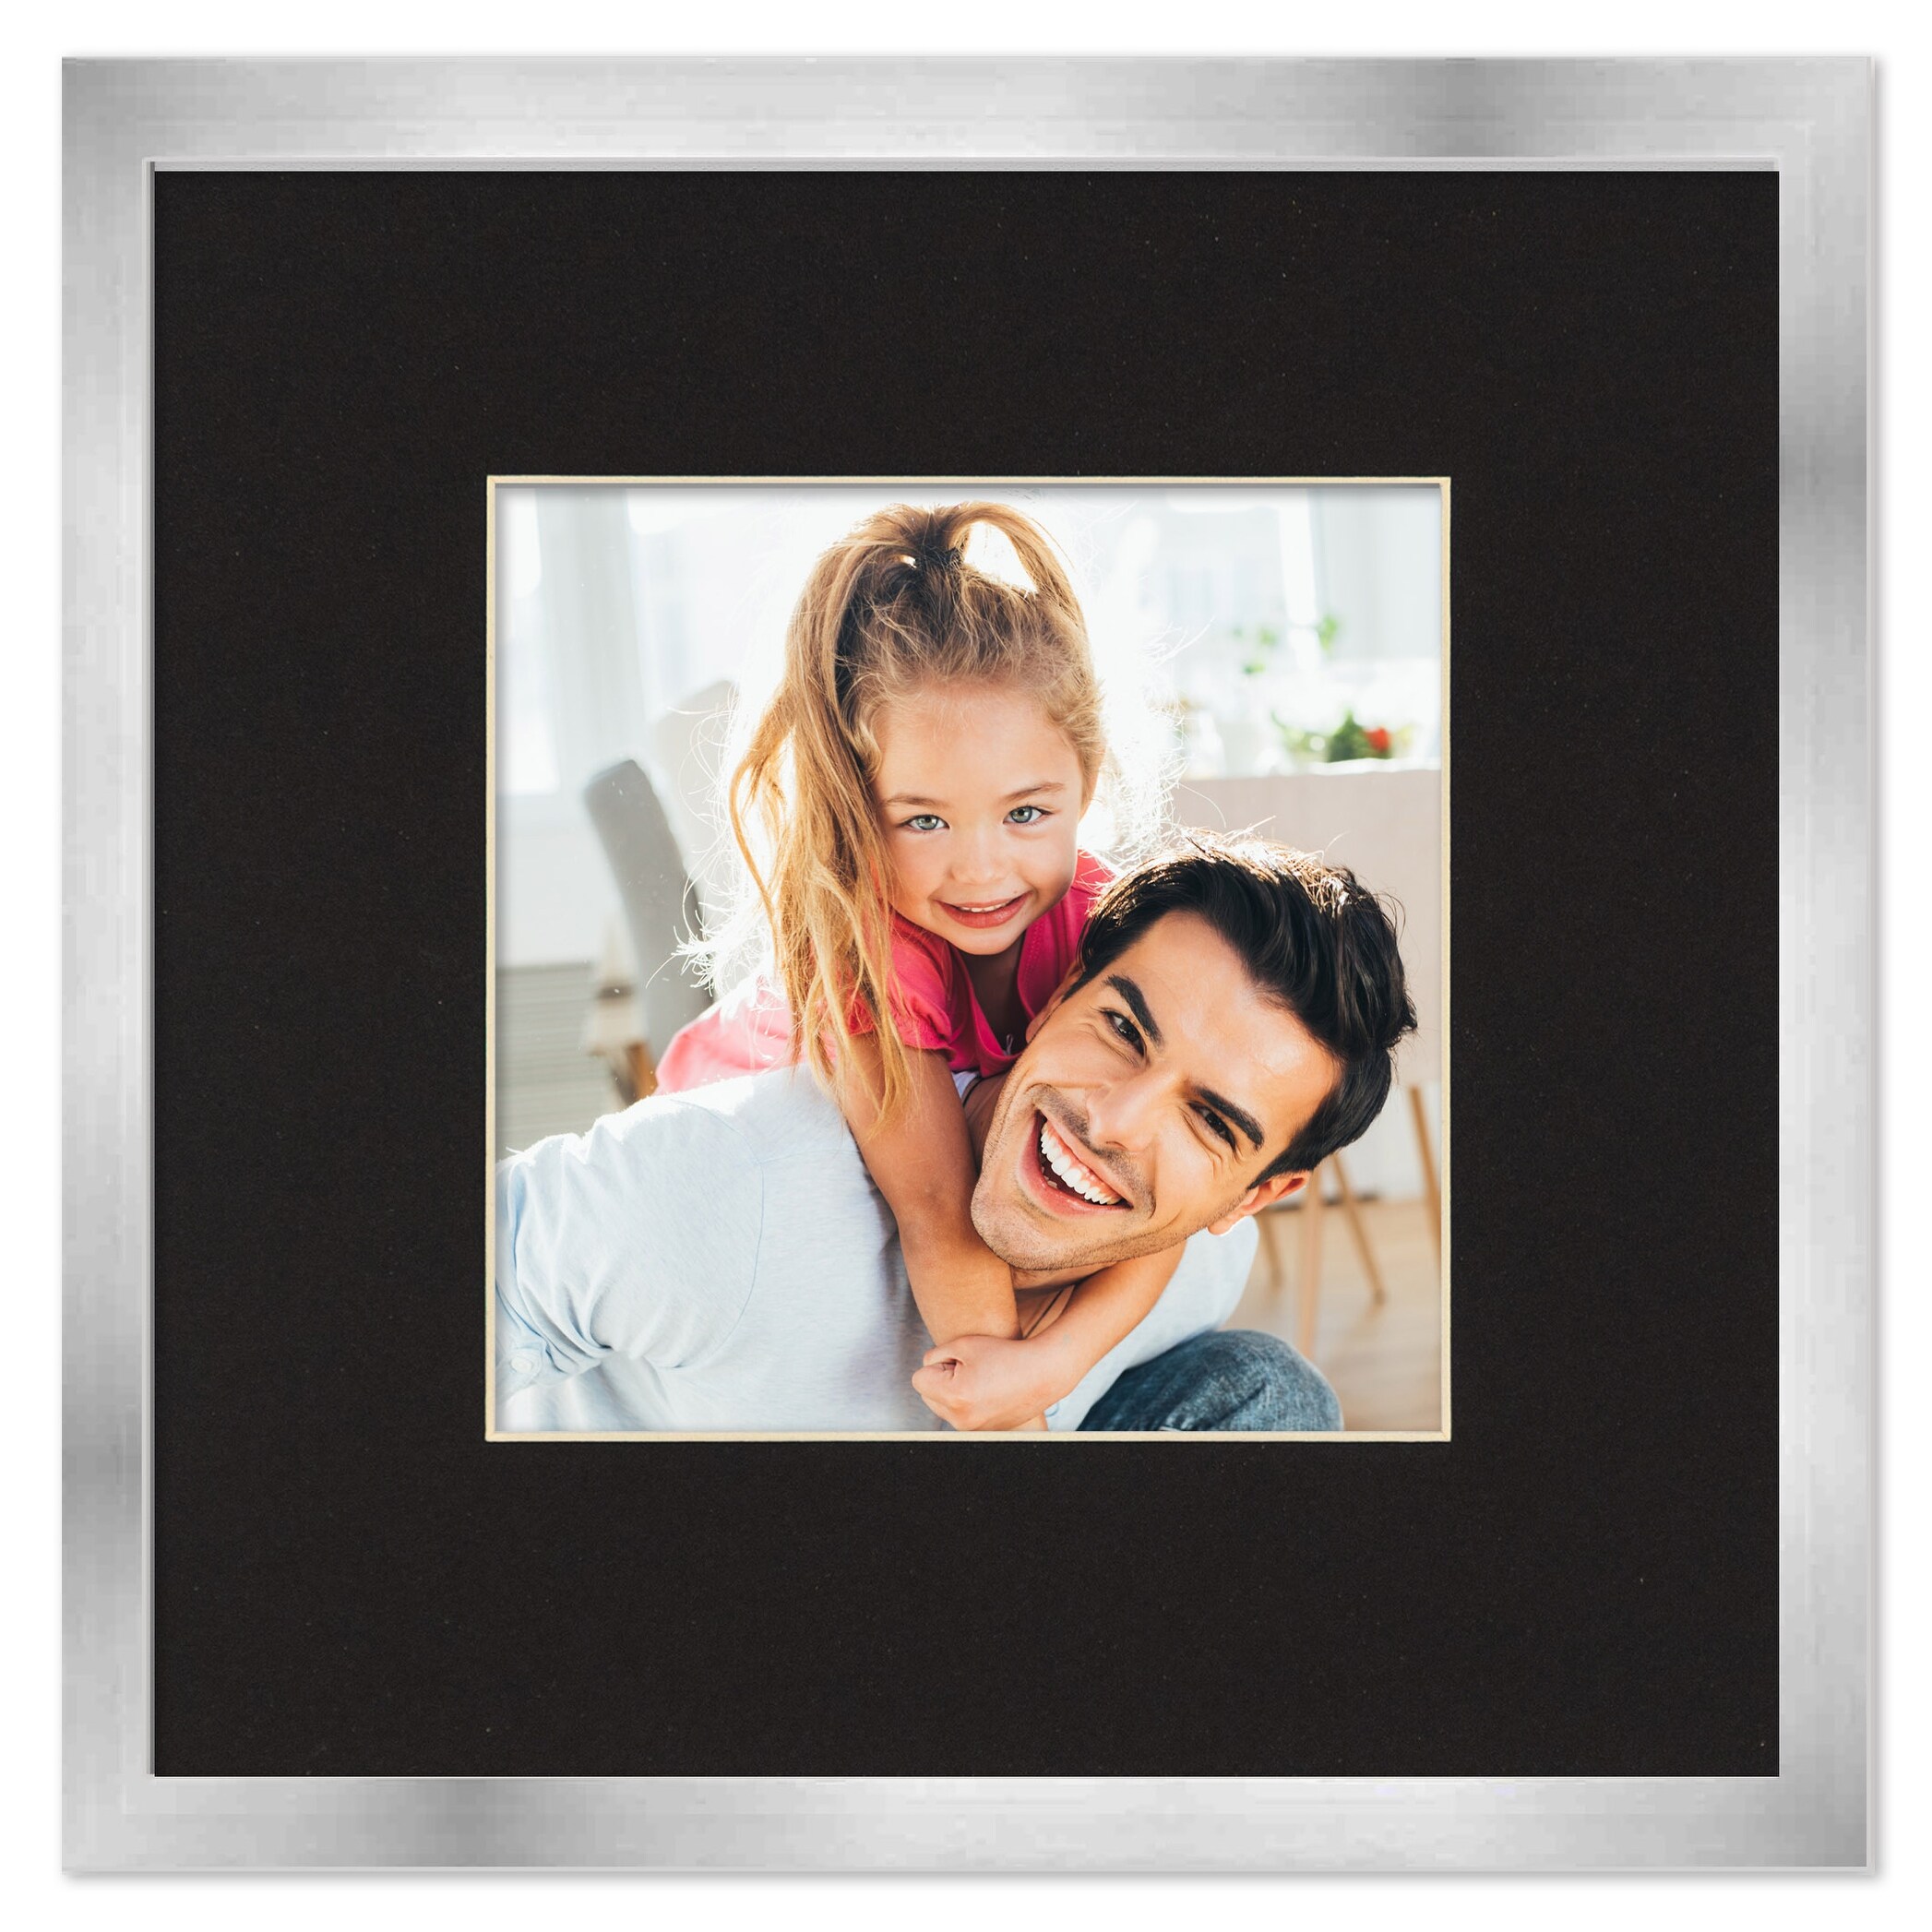 8x8 Frame with Mat - Silver 11x11 Frame Wood Made to Display Print or  Poster Measuring 8 x 8 Inches with Black Photo Mat - Yahoo Shopping